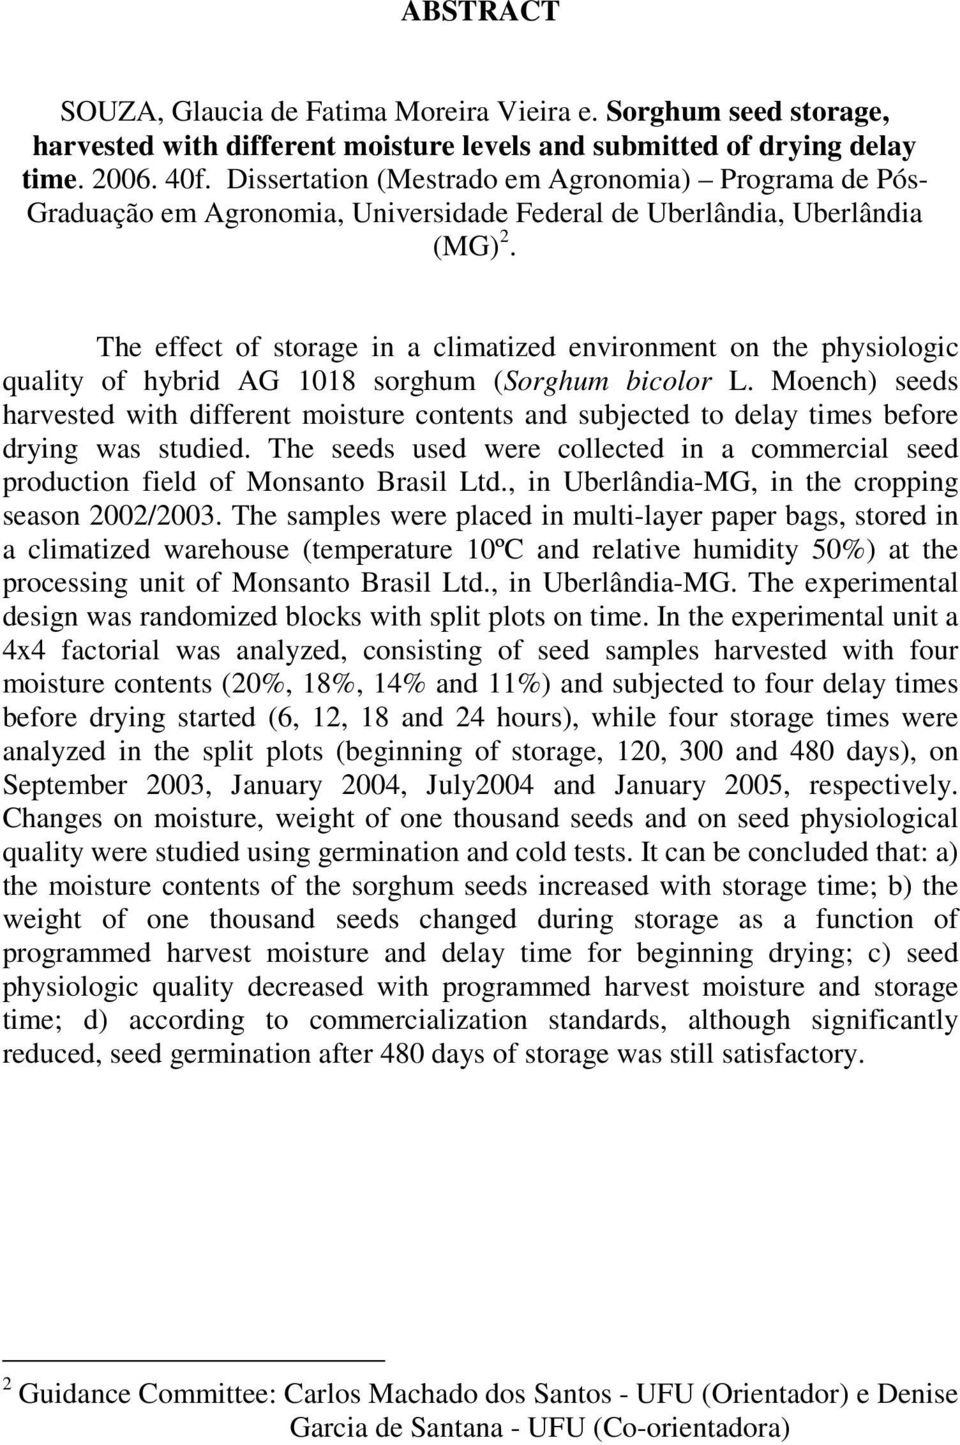 The effect of storage in a climatized environment on the physiologic quality of hybrid AG 1018 sorghum (Sorghum bicolor L.